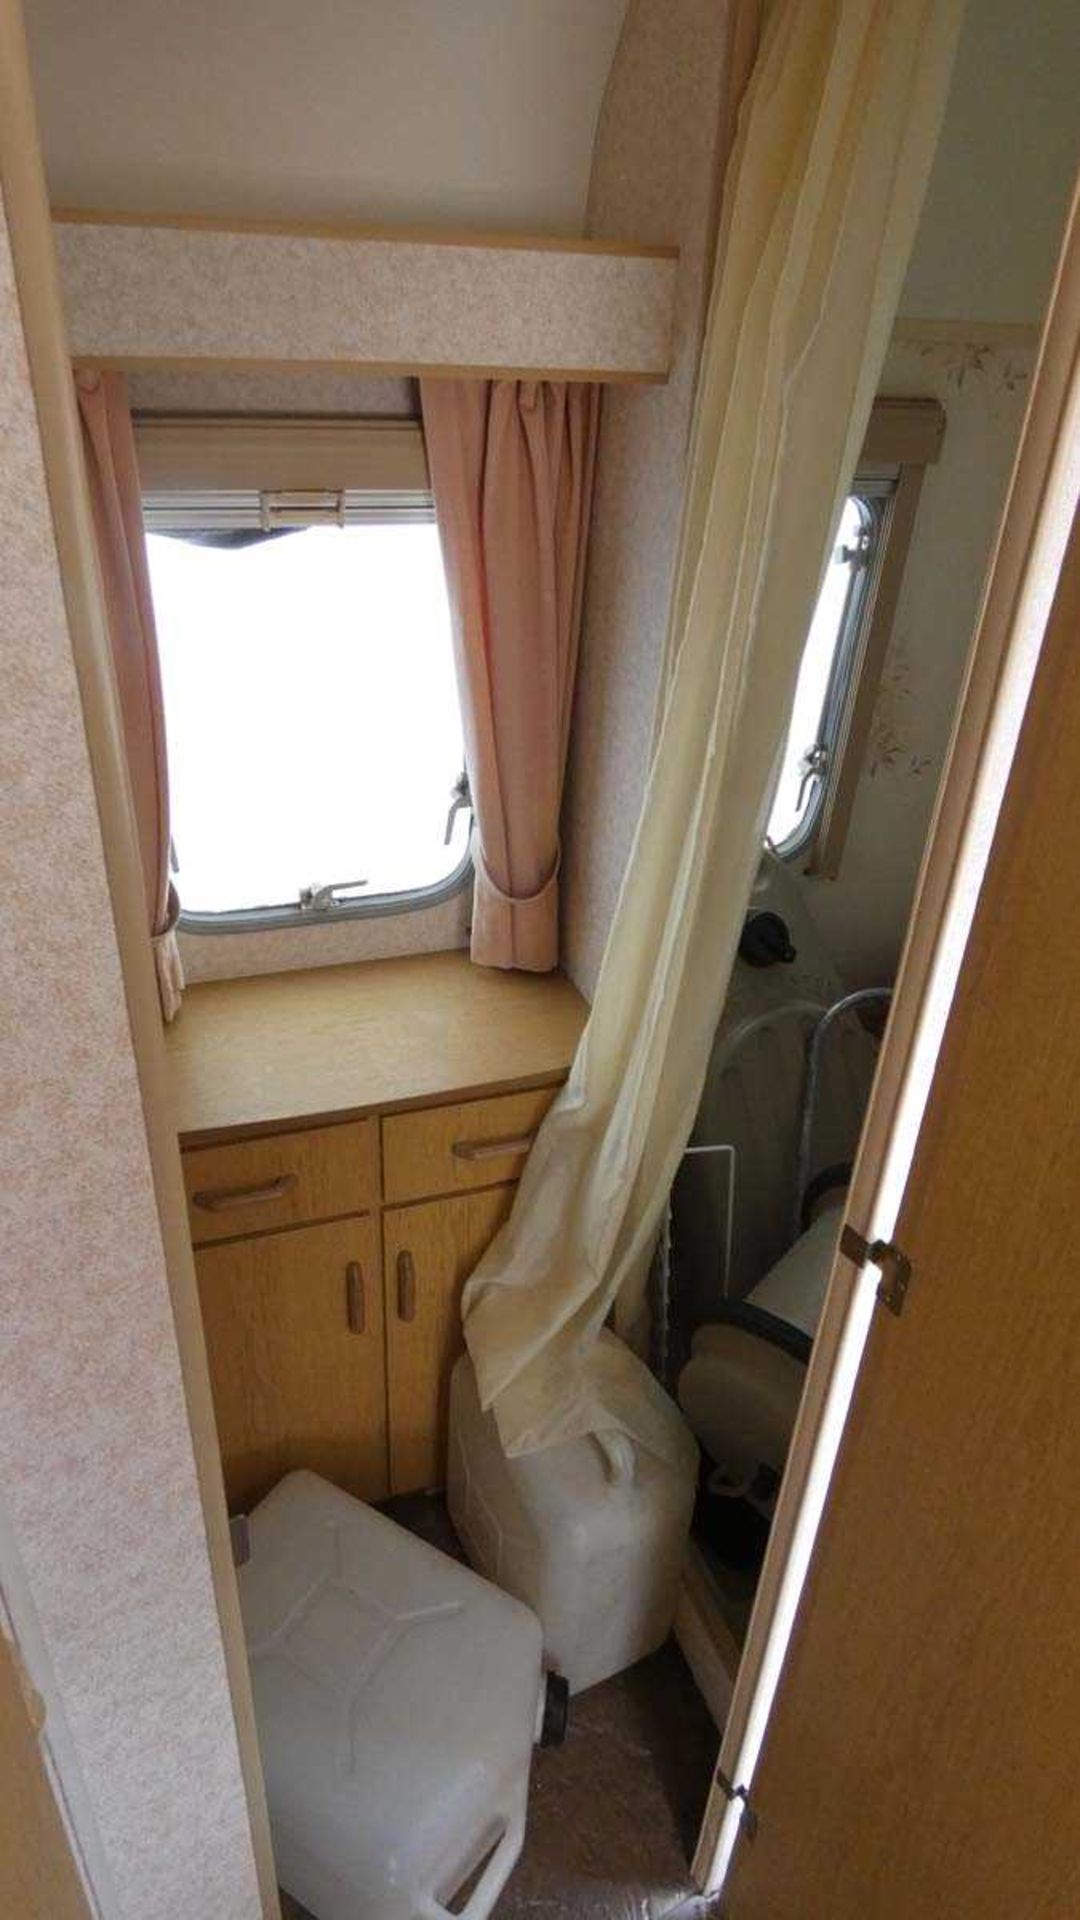 Abbey GTS215 2-berth caravan with locks and various other accessories - Image 7 of 7